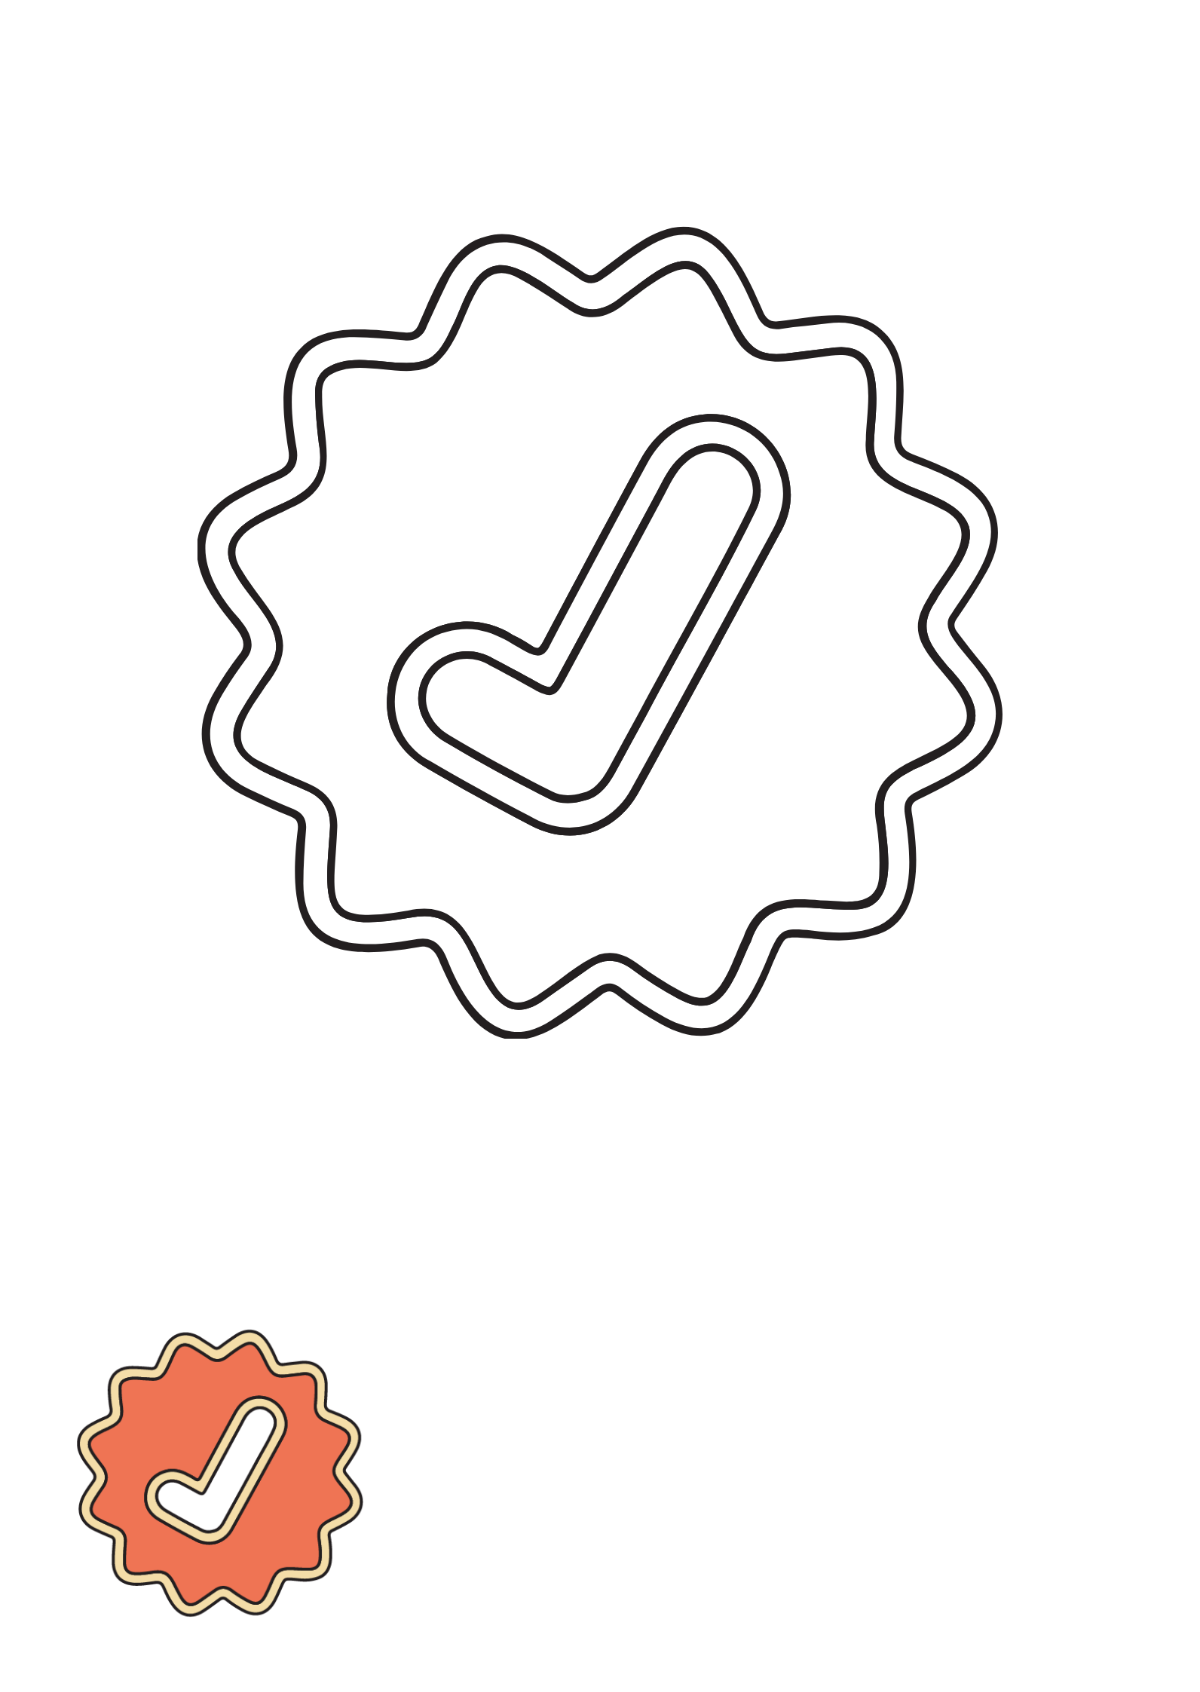 Free Verified Tick Mark coloring page Template